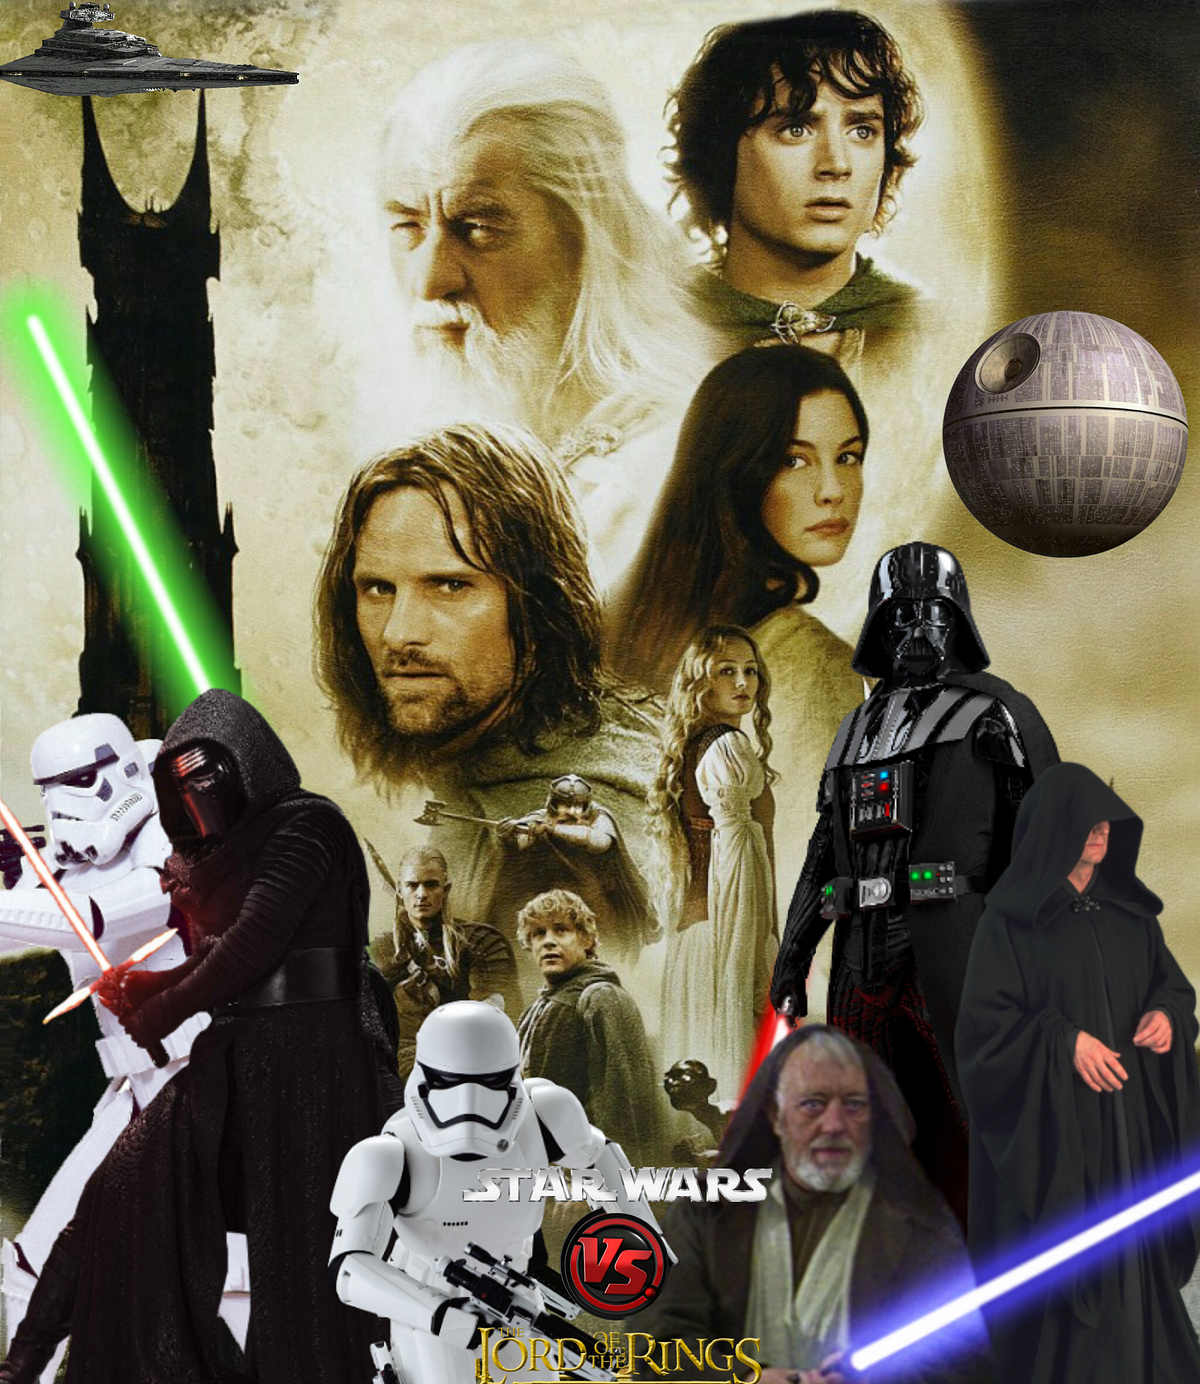 Star Wars Vs. Lord of the Rings. The Totally Unbiased Faceoff You Didn't… |  by Tessa Andrews | Fanfare